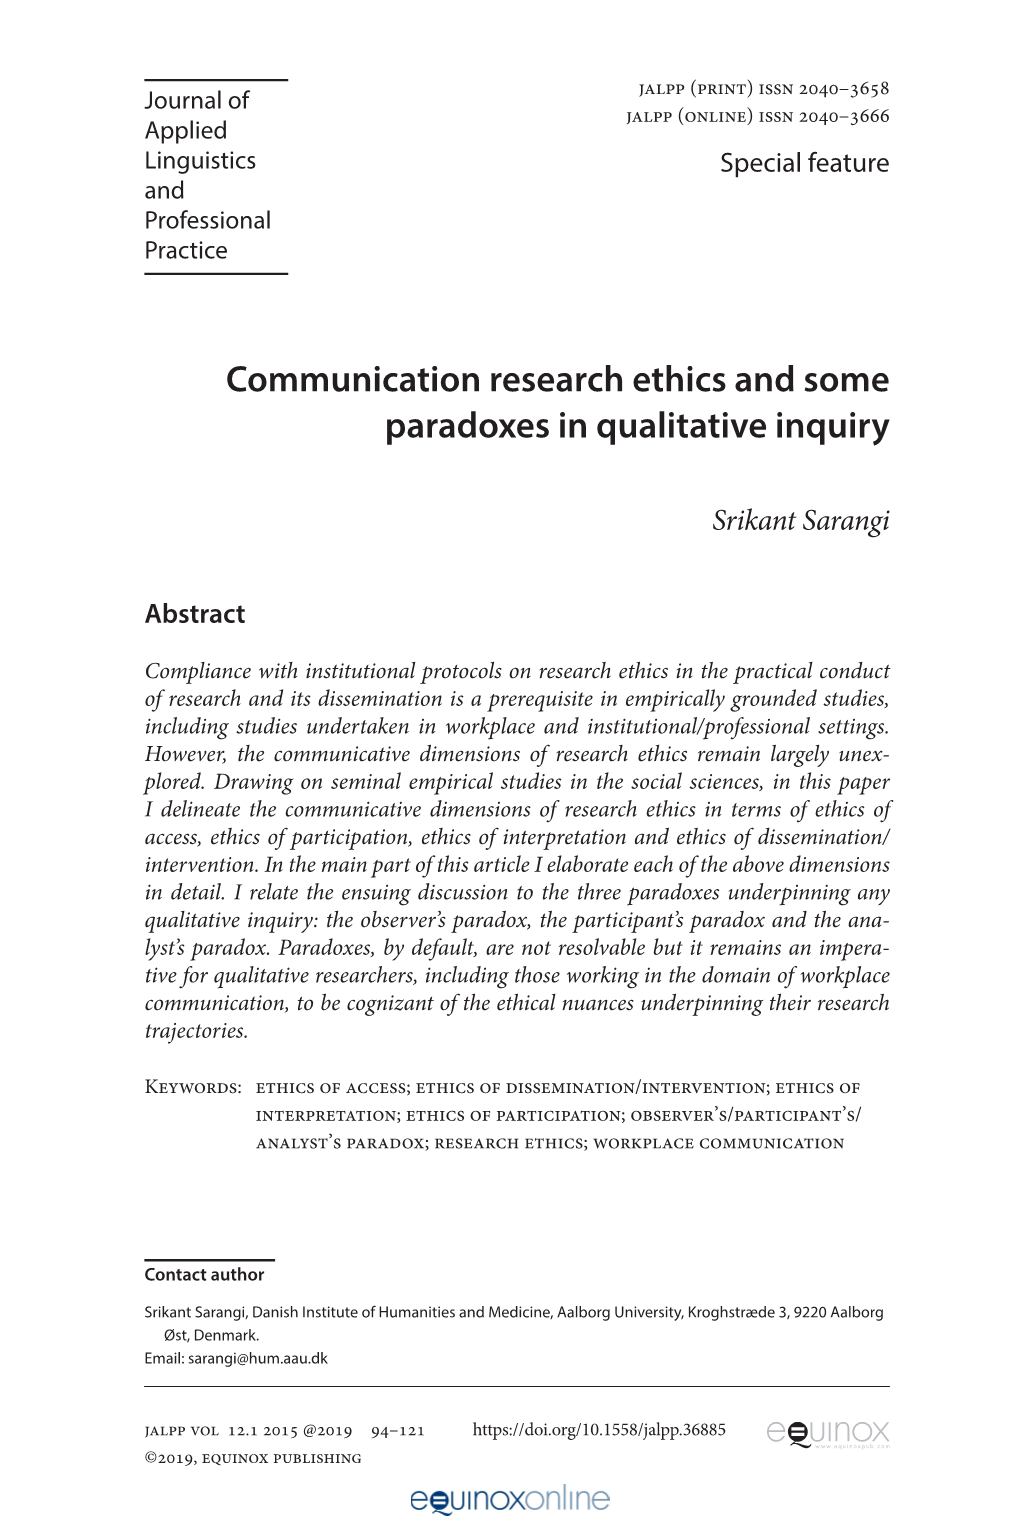 Communication Research Ethics and Some Paradoxes in Qualitative Inquiry